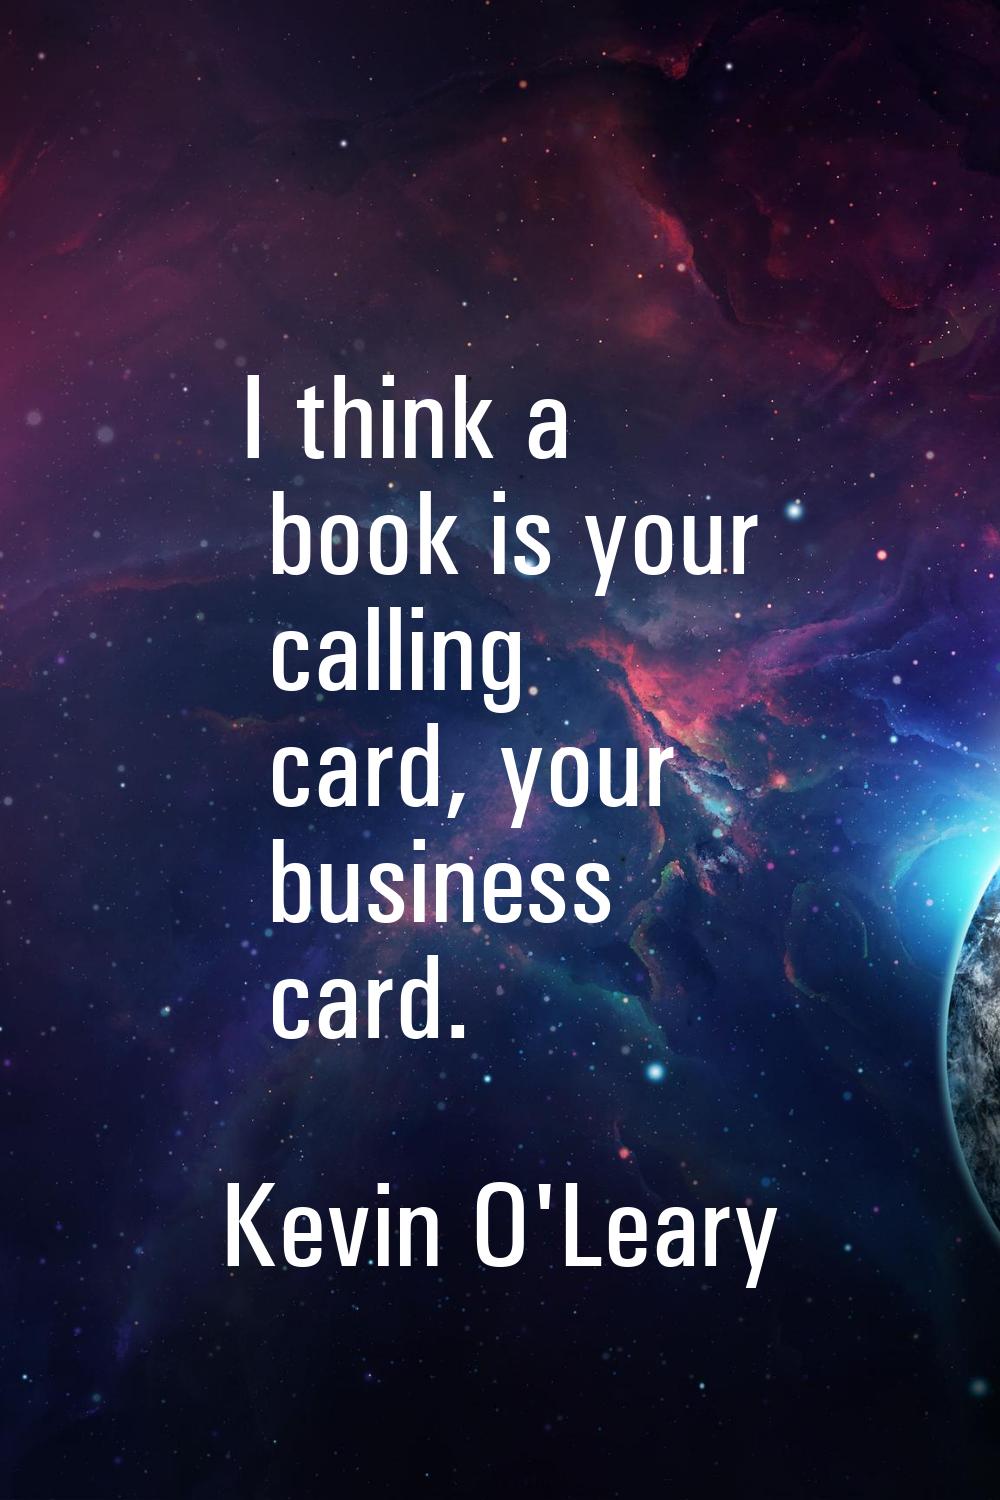 I think a book is your calling card, your business card.